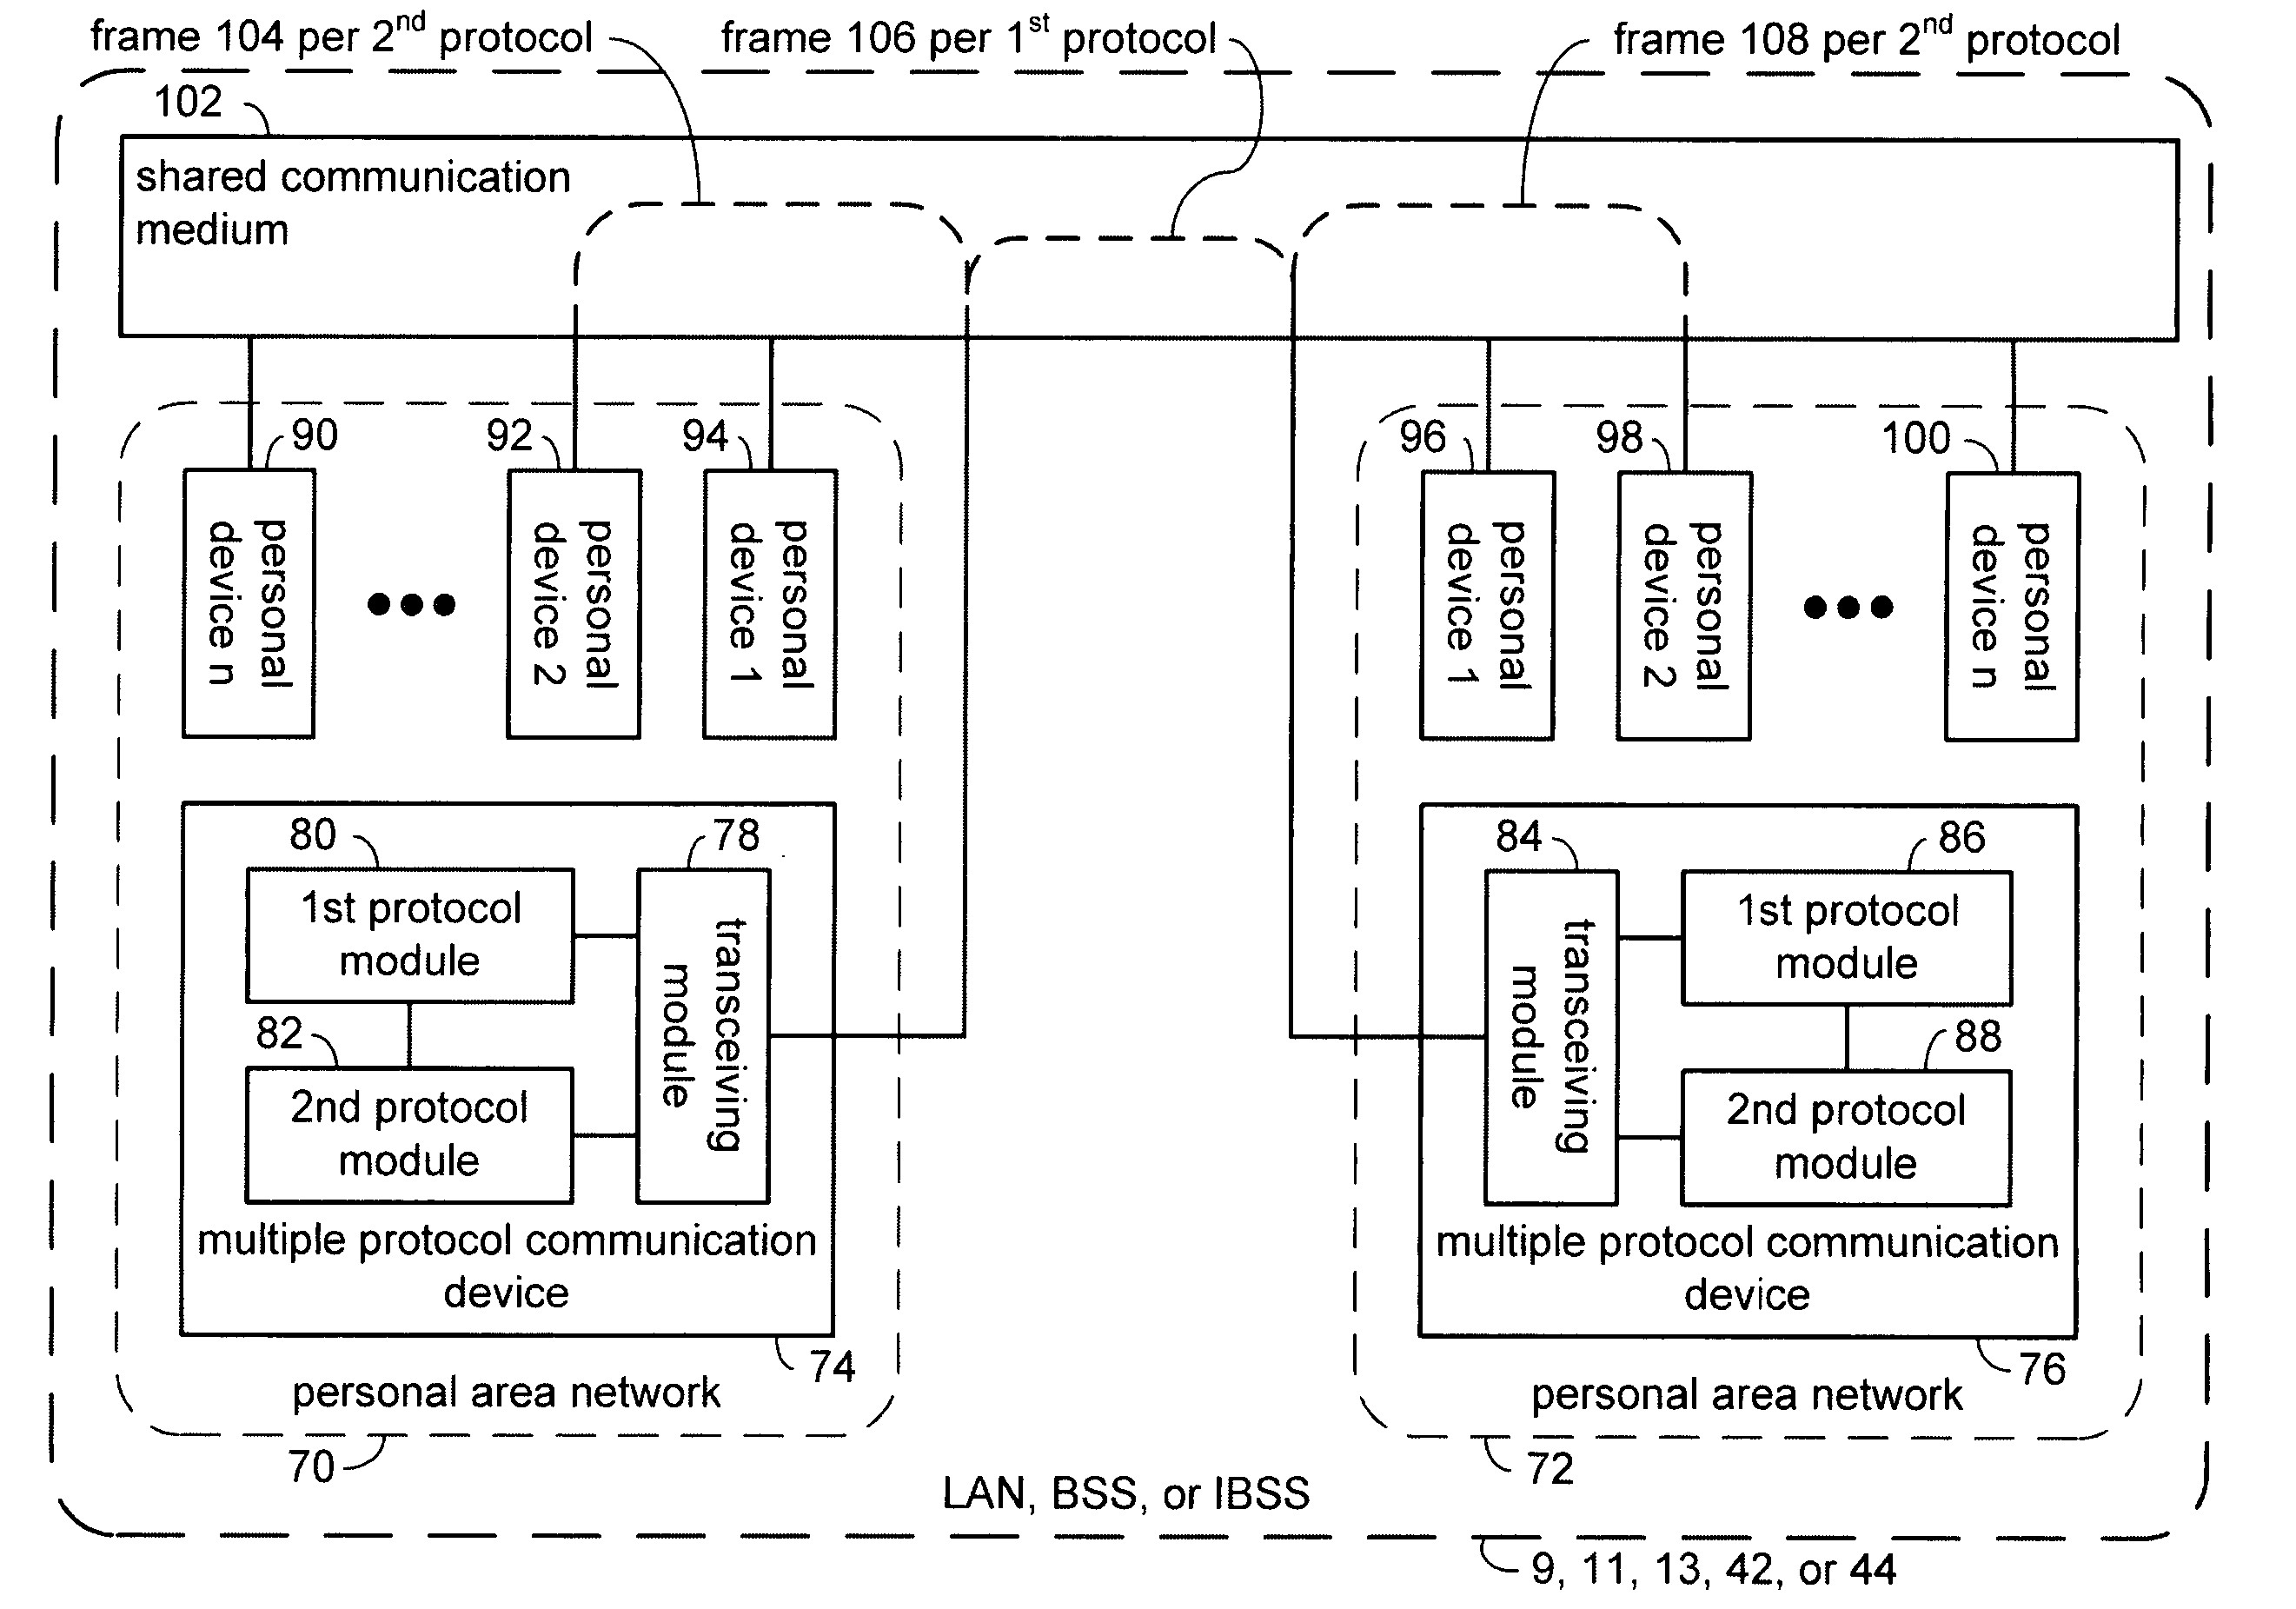 Collision avoidance in multiple protocol communication networks using a shared communication medium